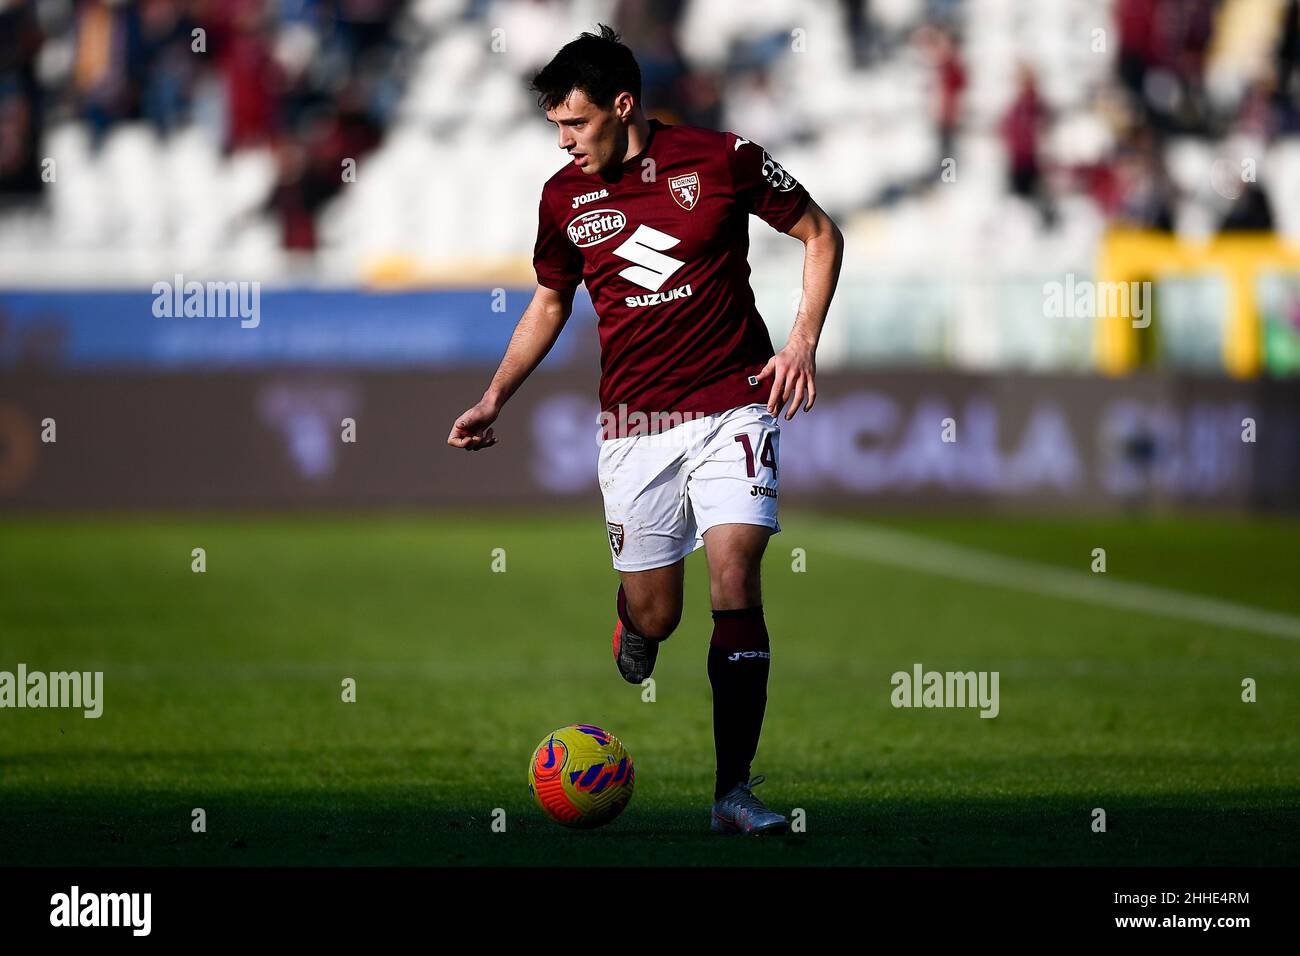 Turin, Italy. 23 January 2022. Josip Brekalo of Torino FC in action during the Serie A football match between Torino FC and US Sassuolo. Credit: Nicolò Campo/Alamy Live News Stock Photo